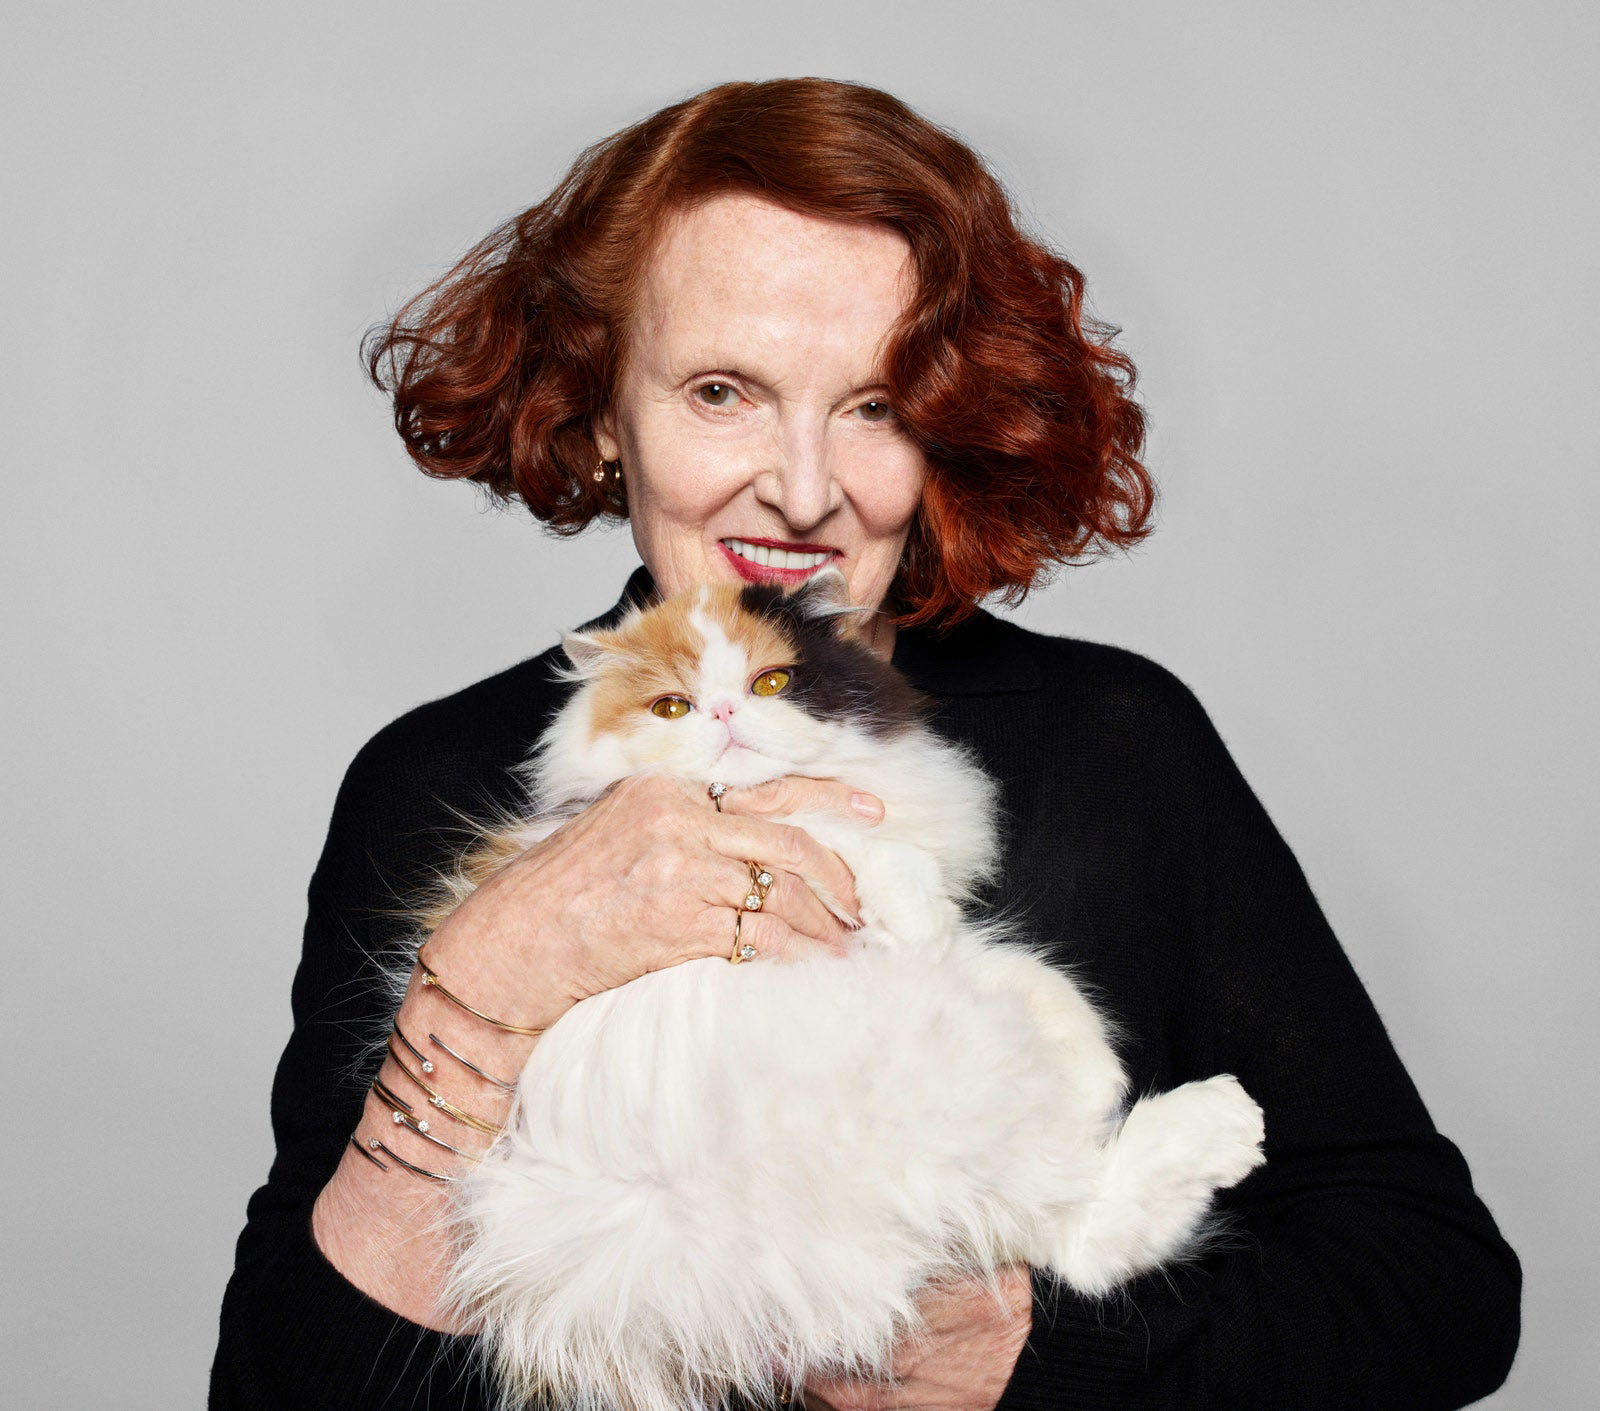 Portrait of an elder woman with red hair smiling and posing with her cat wearing pandora rings and bracelets as jewelry